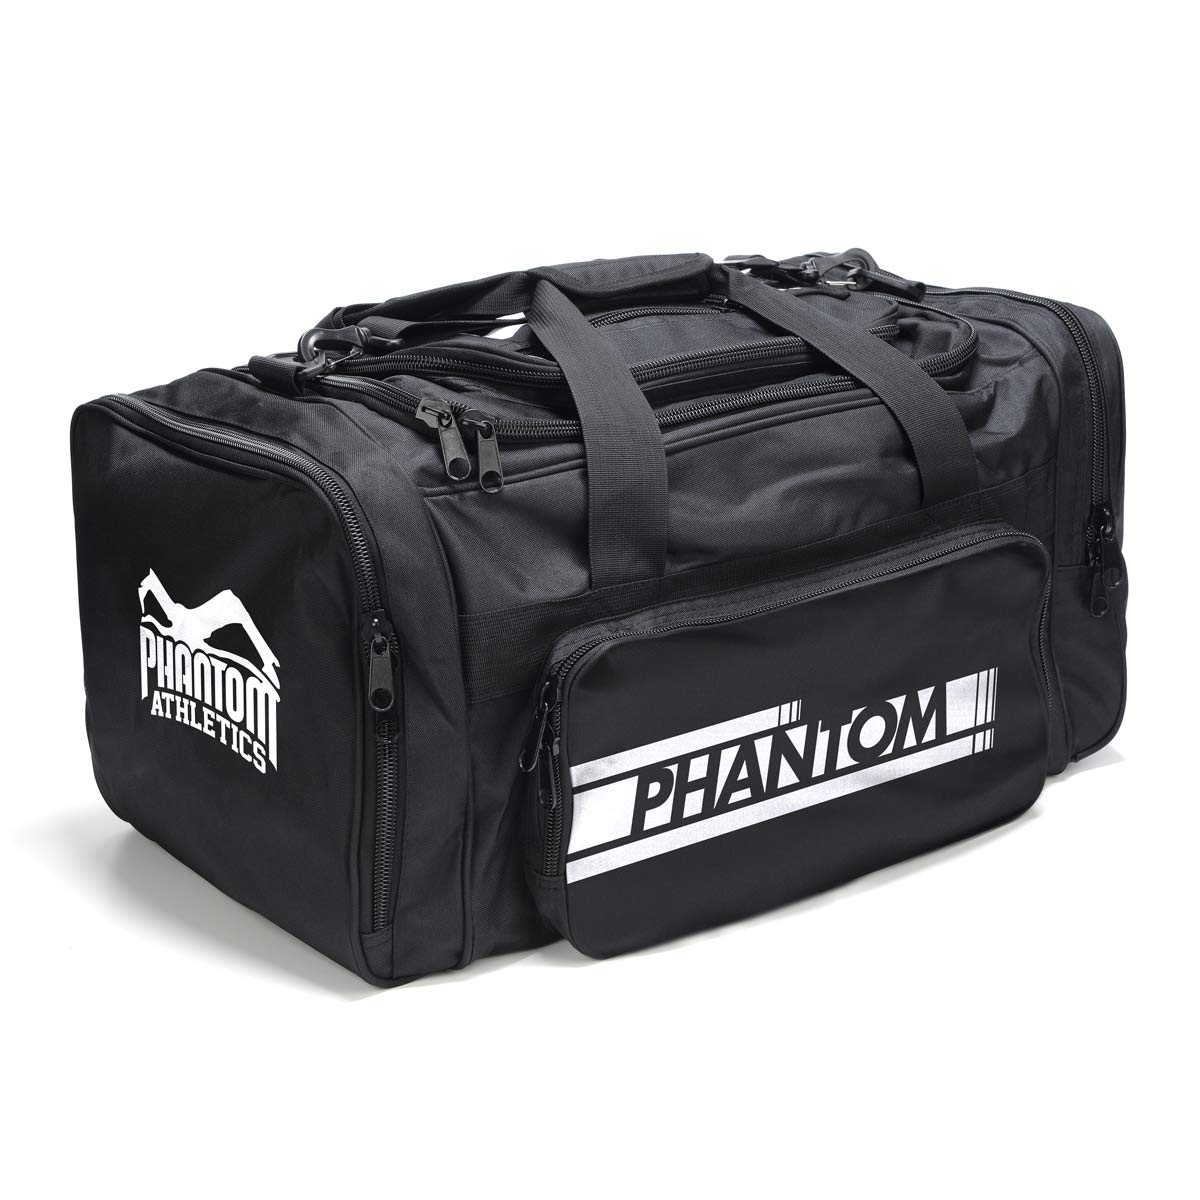 The Phantom TEAM sports bag with many compartments for martial arts